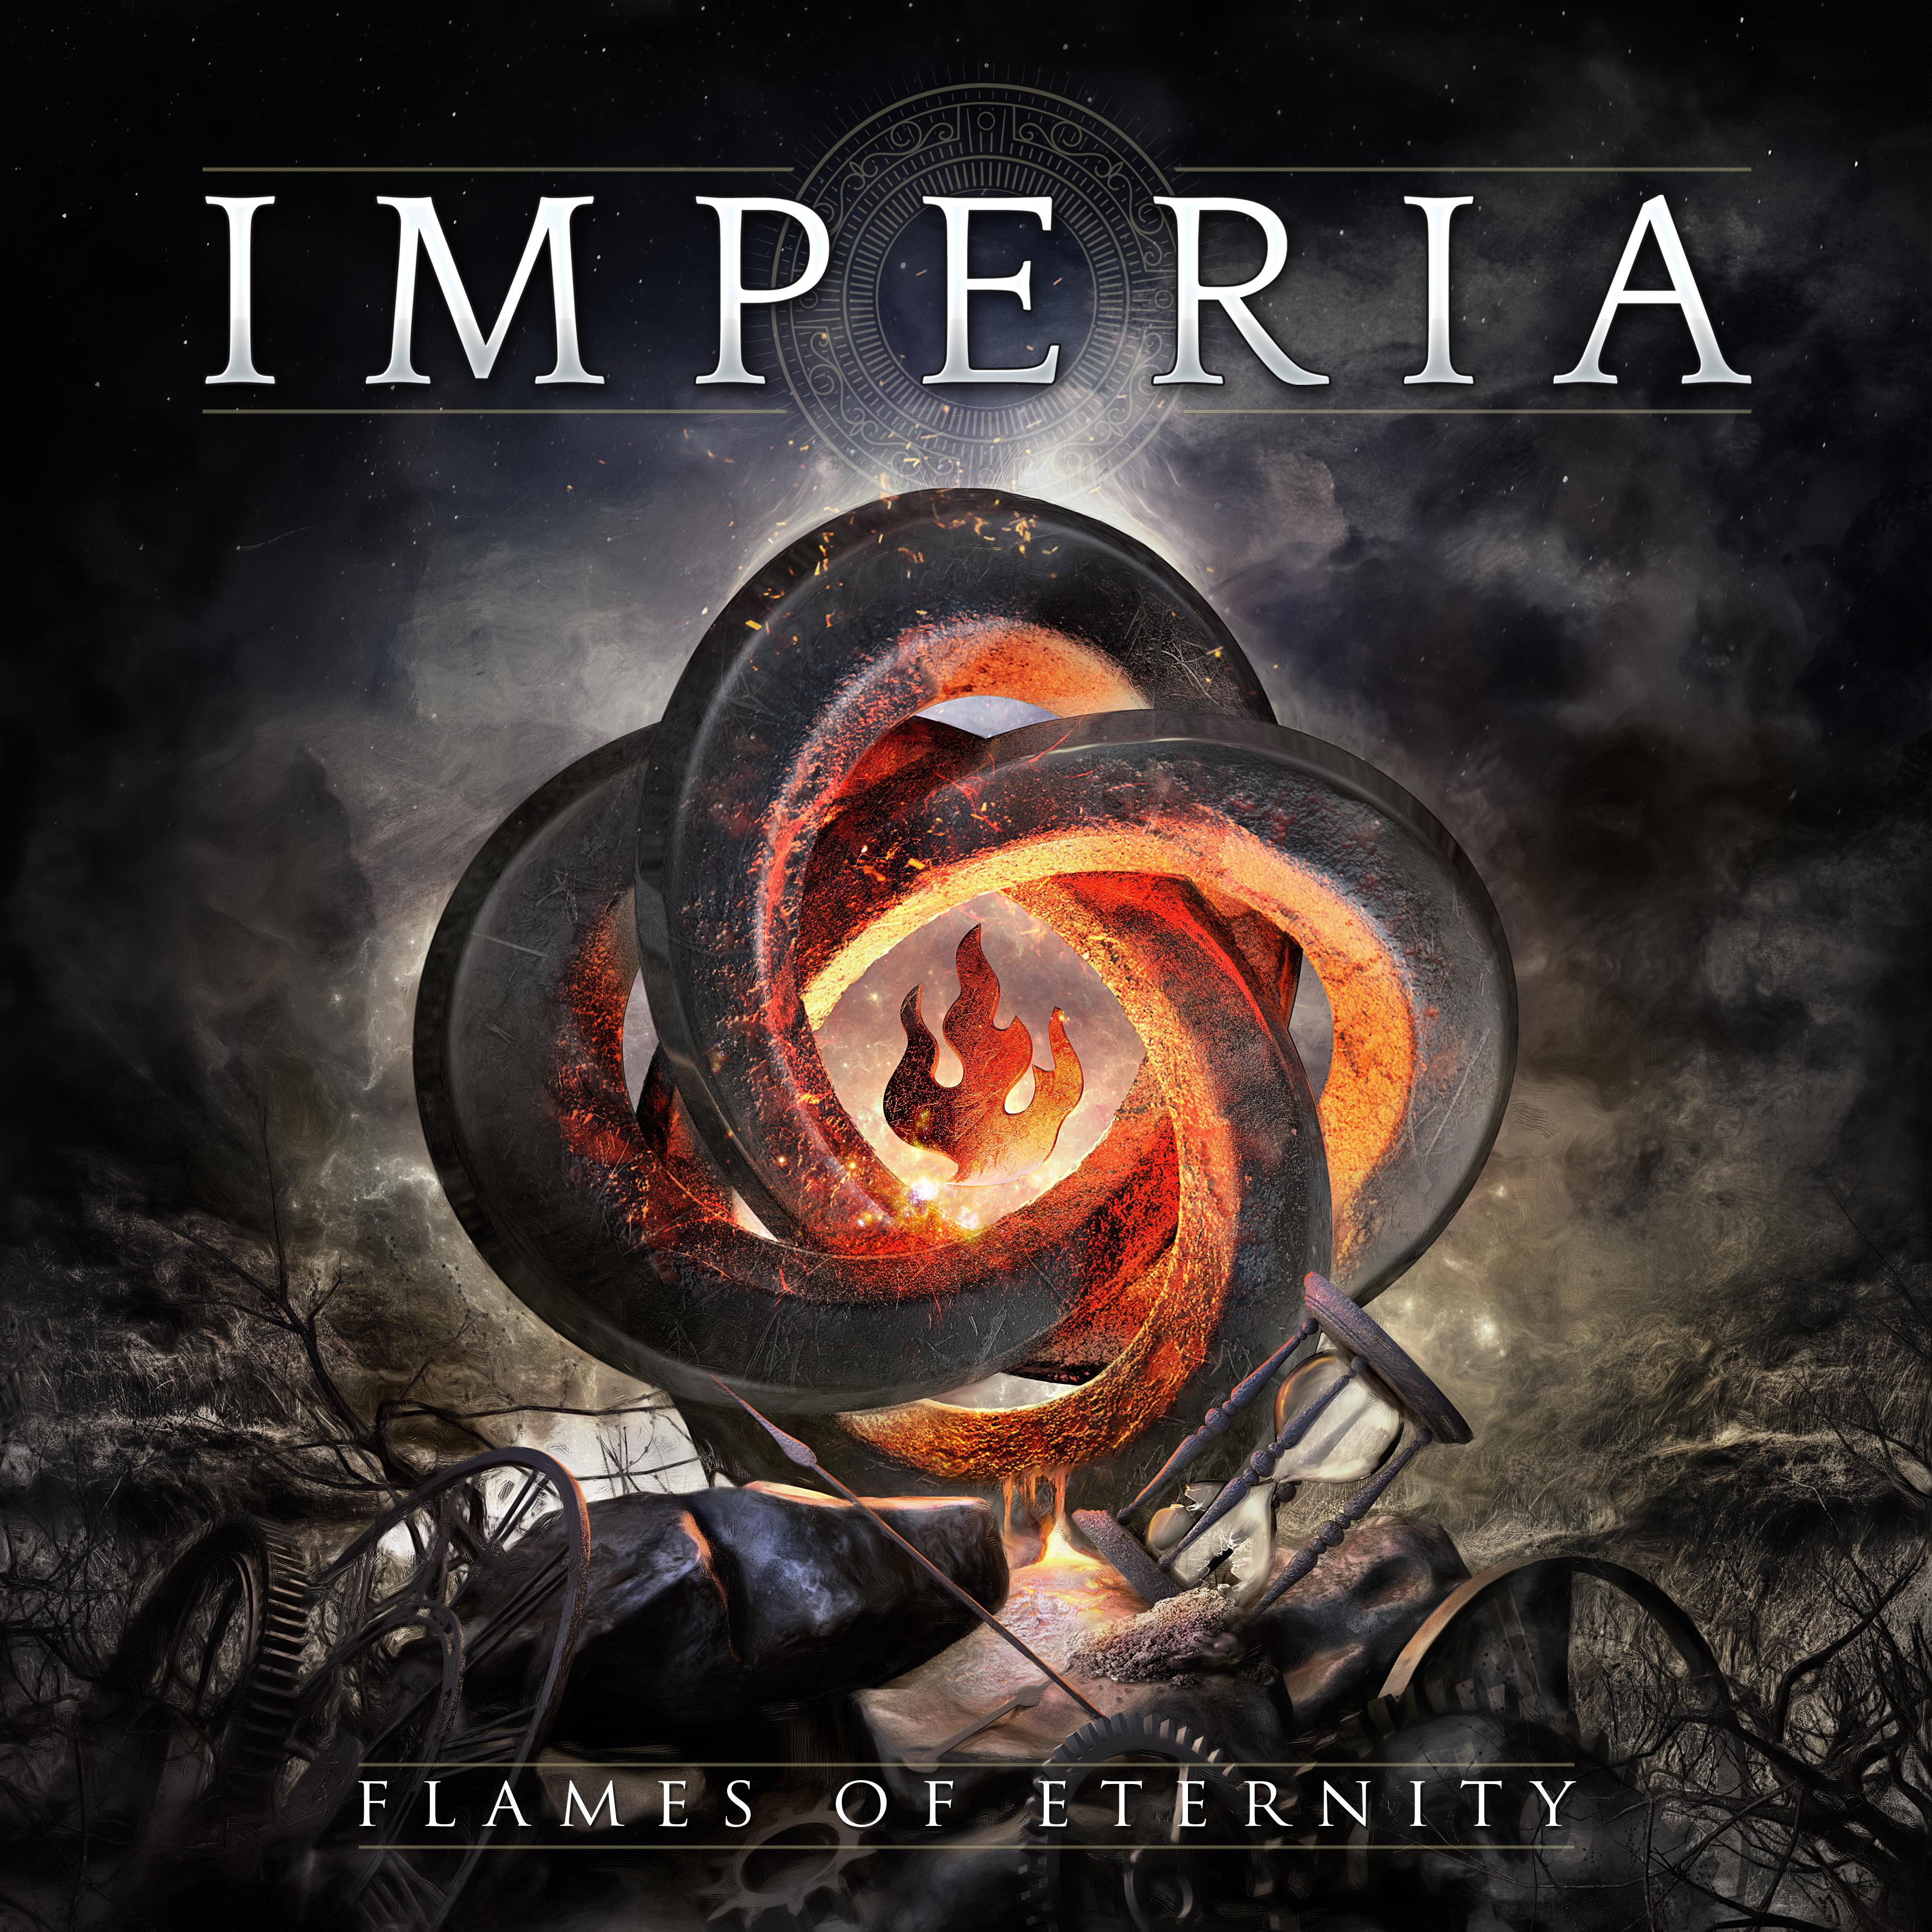 Imperia - Beauty Within